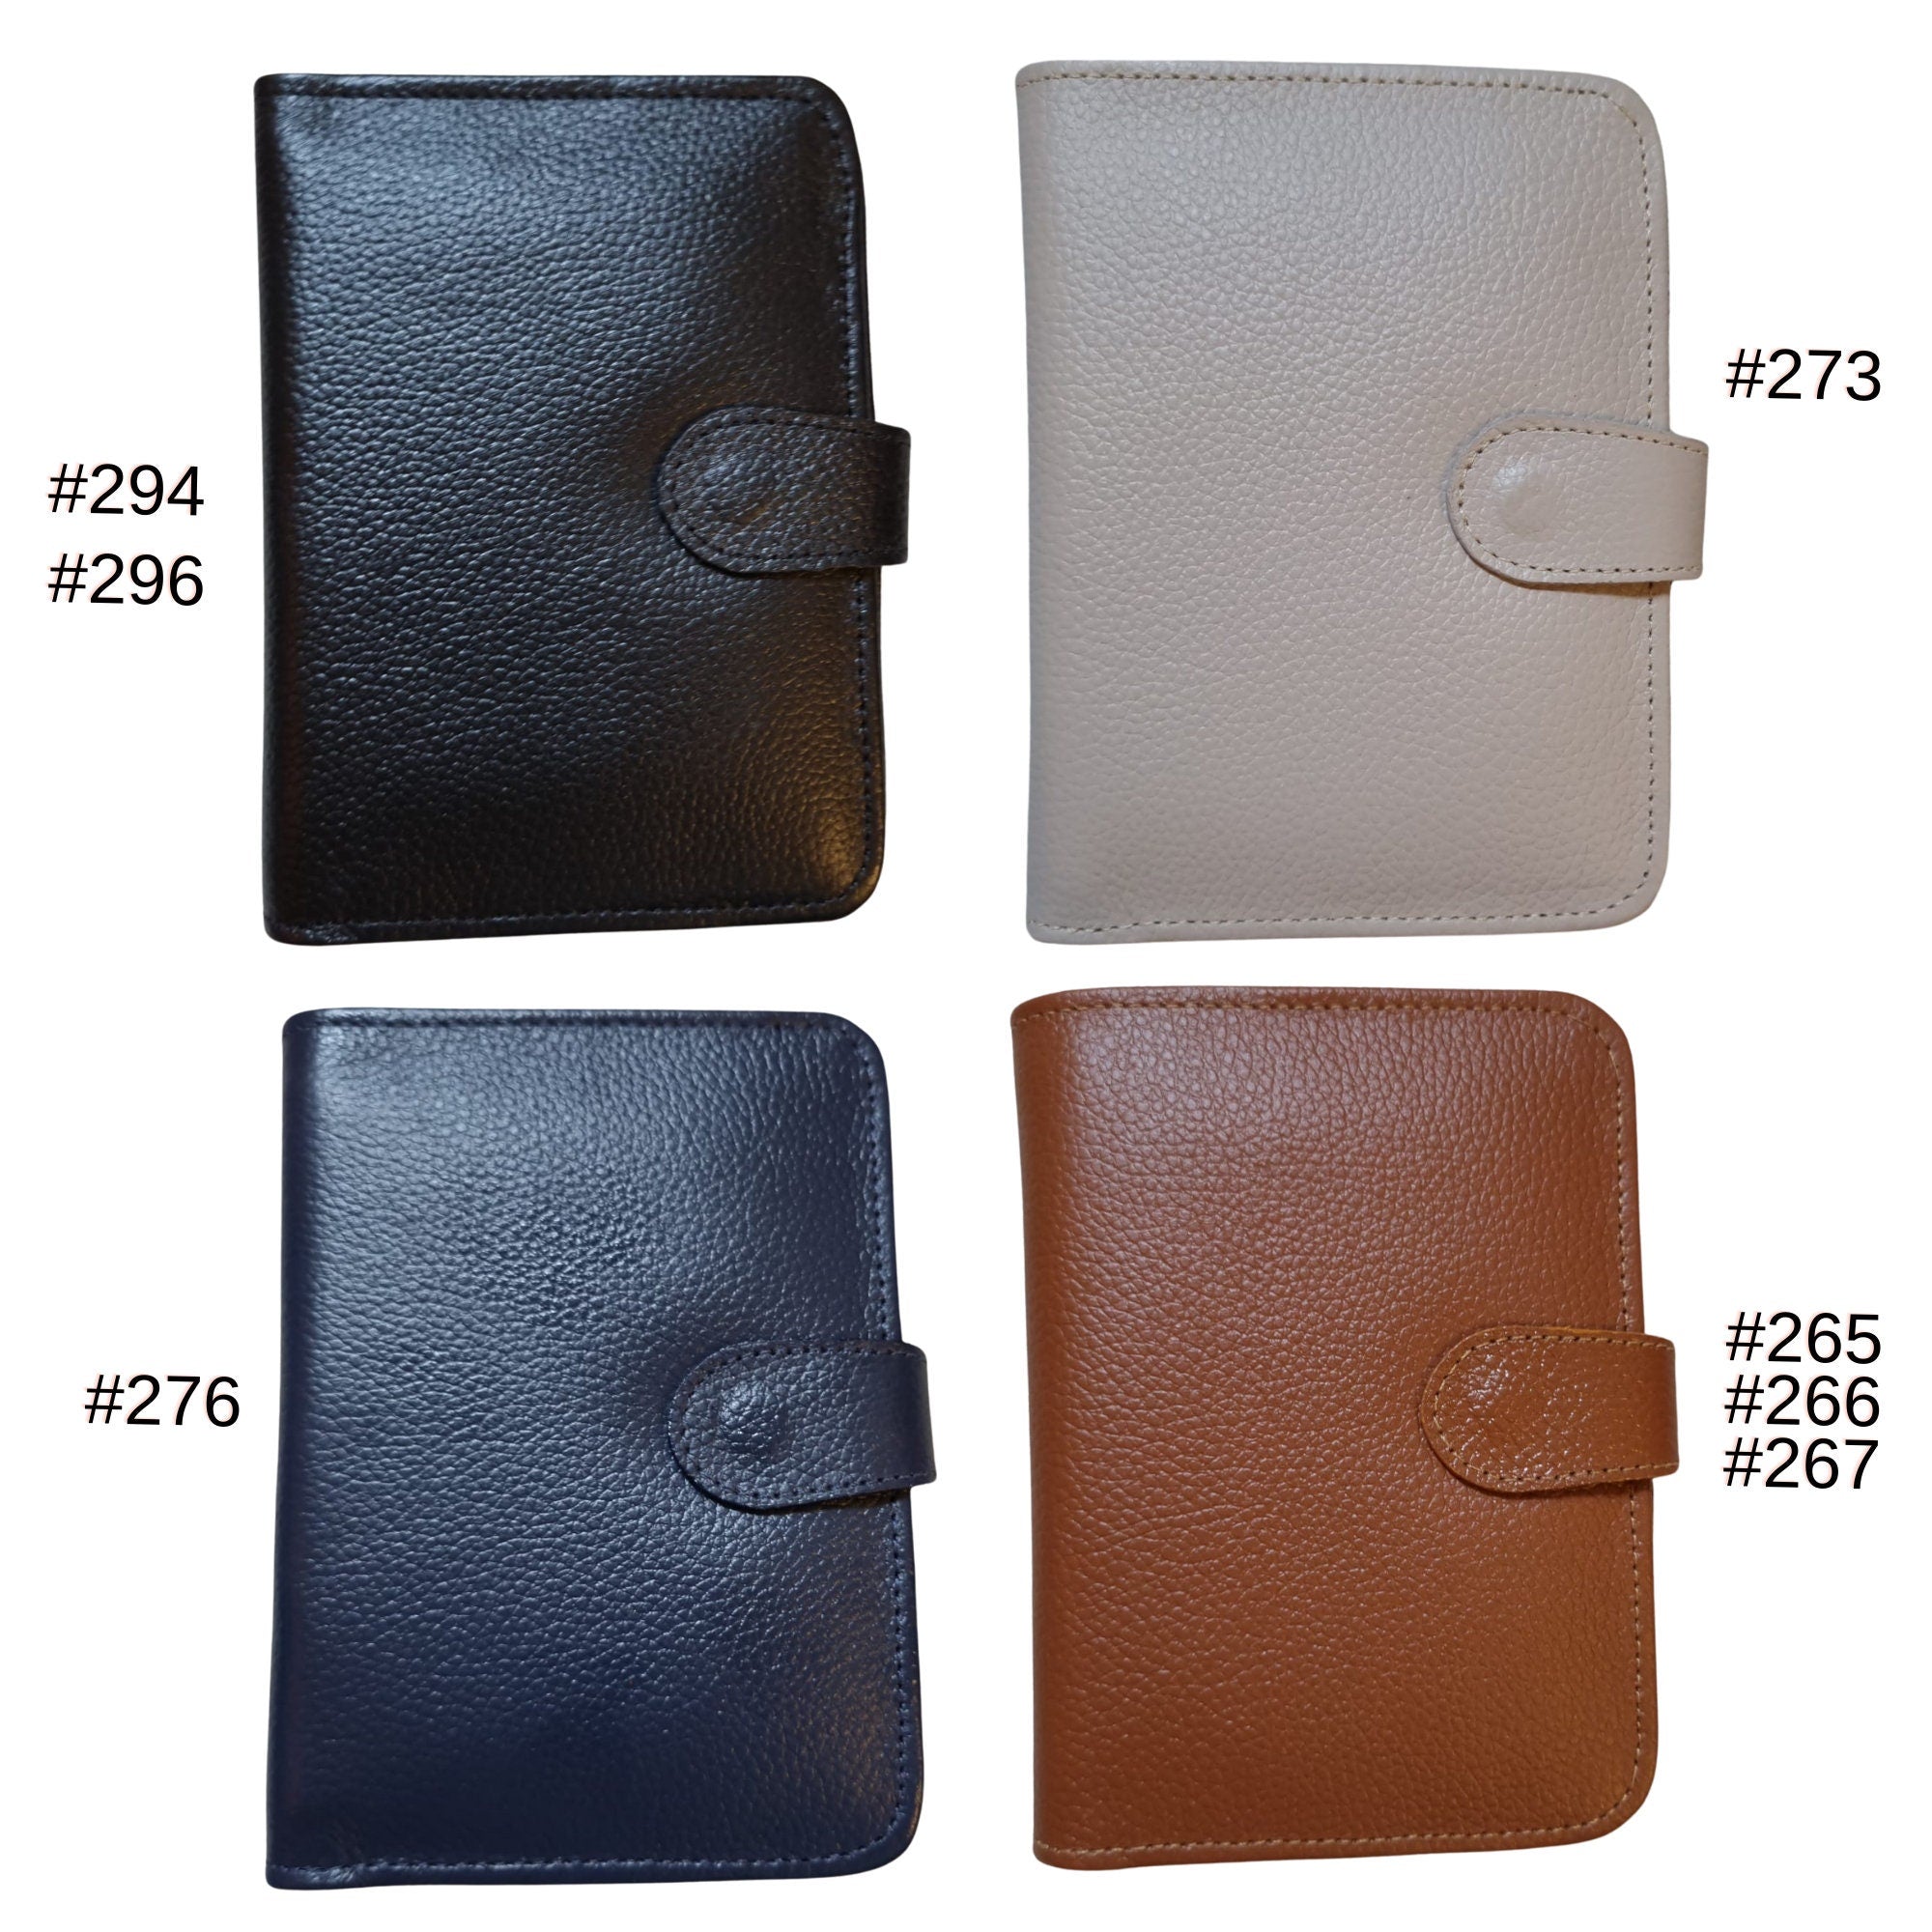 Unisex Leather Passport Holder I Gift I Genuine Leather I made in Colombia